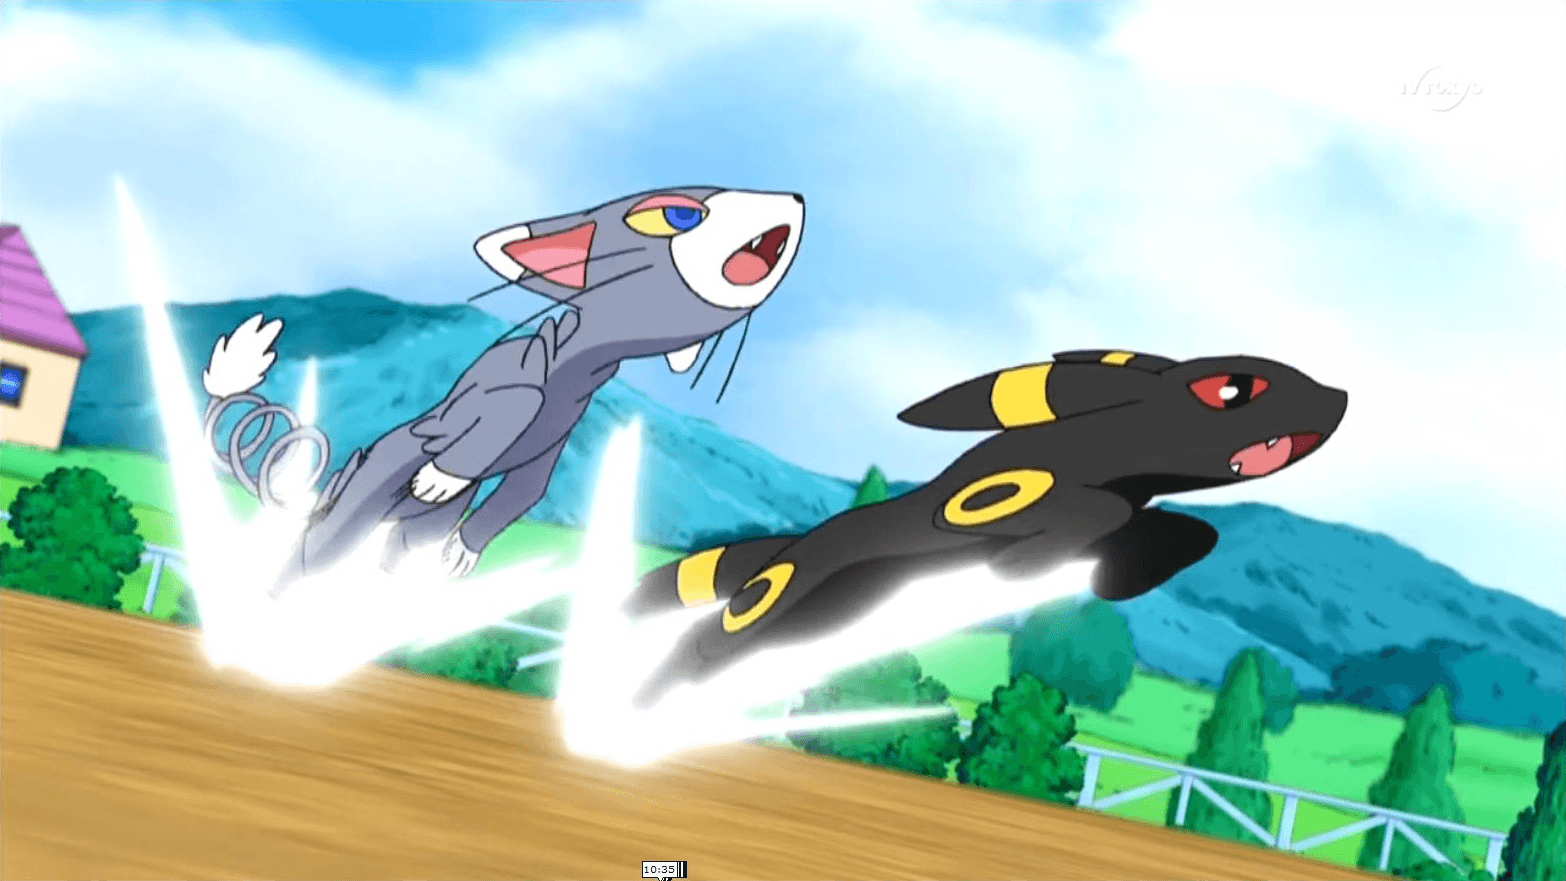 Glameow and Umbreon fight together. glameow. Pokémon